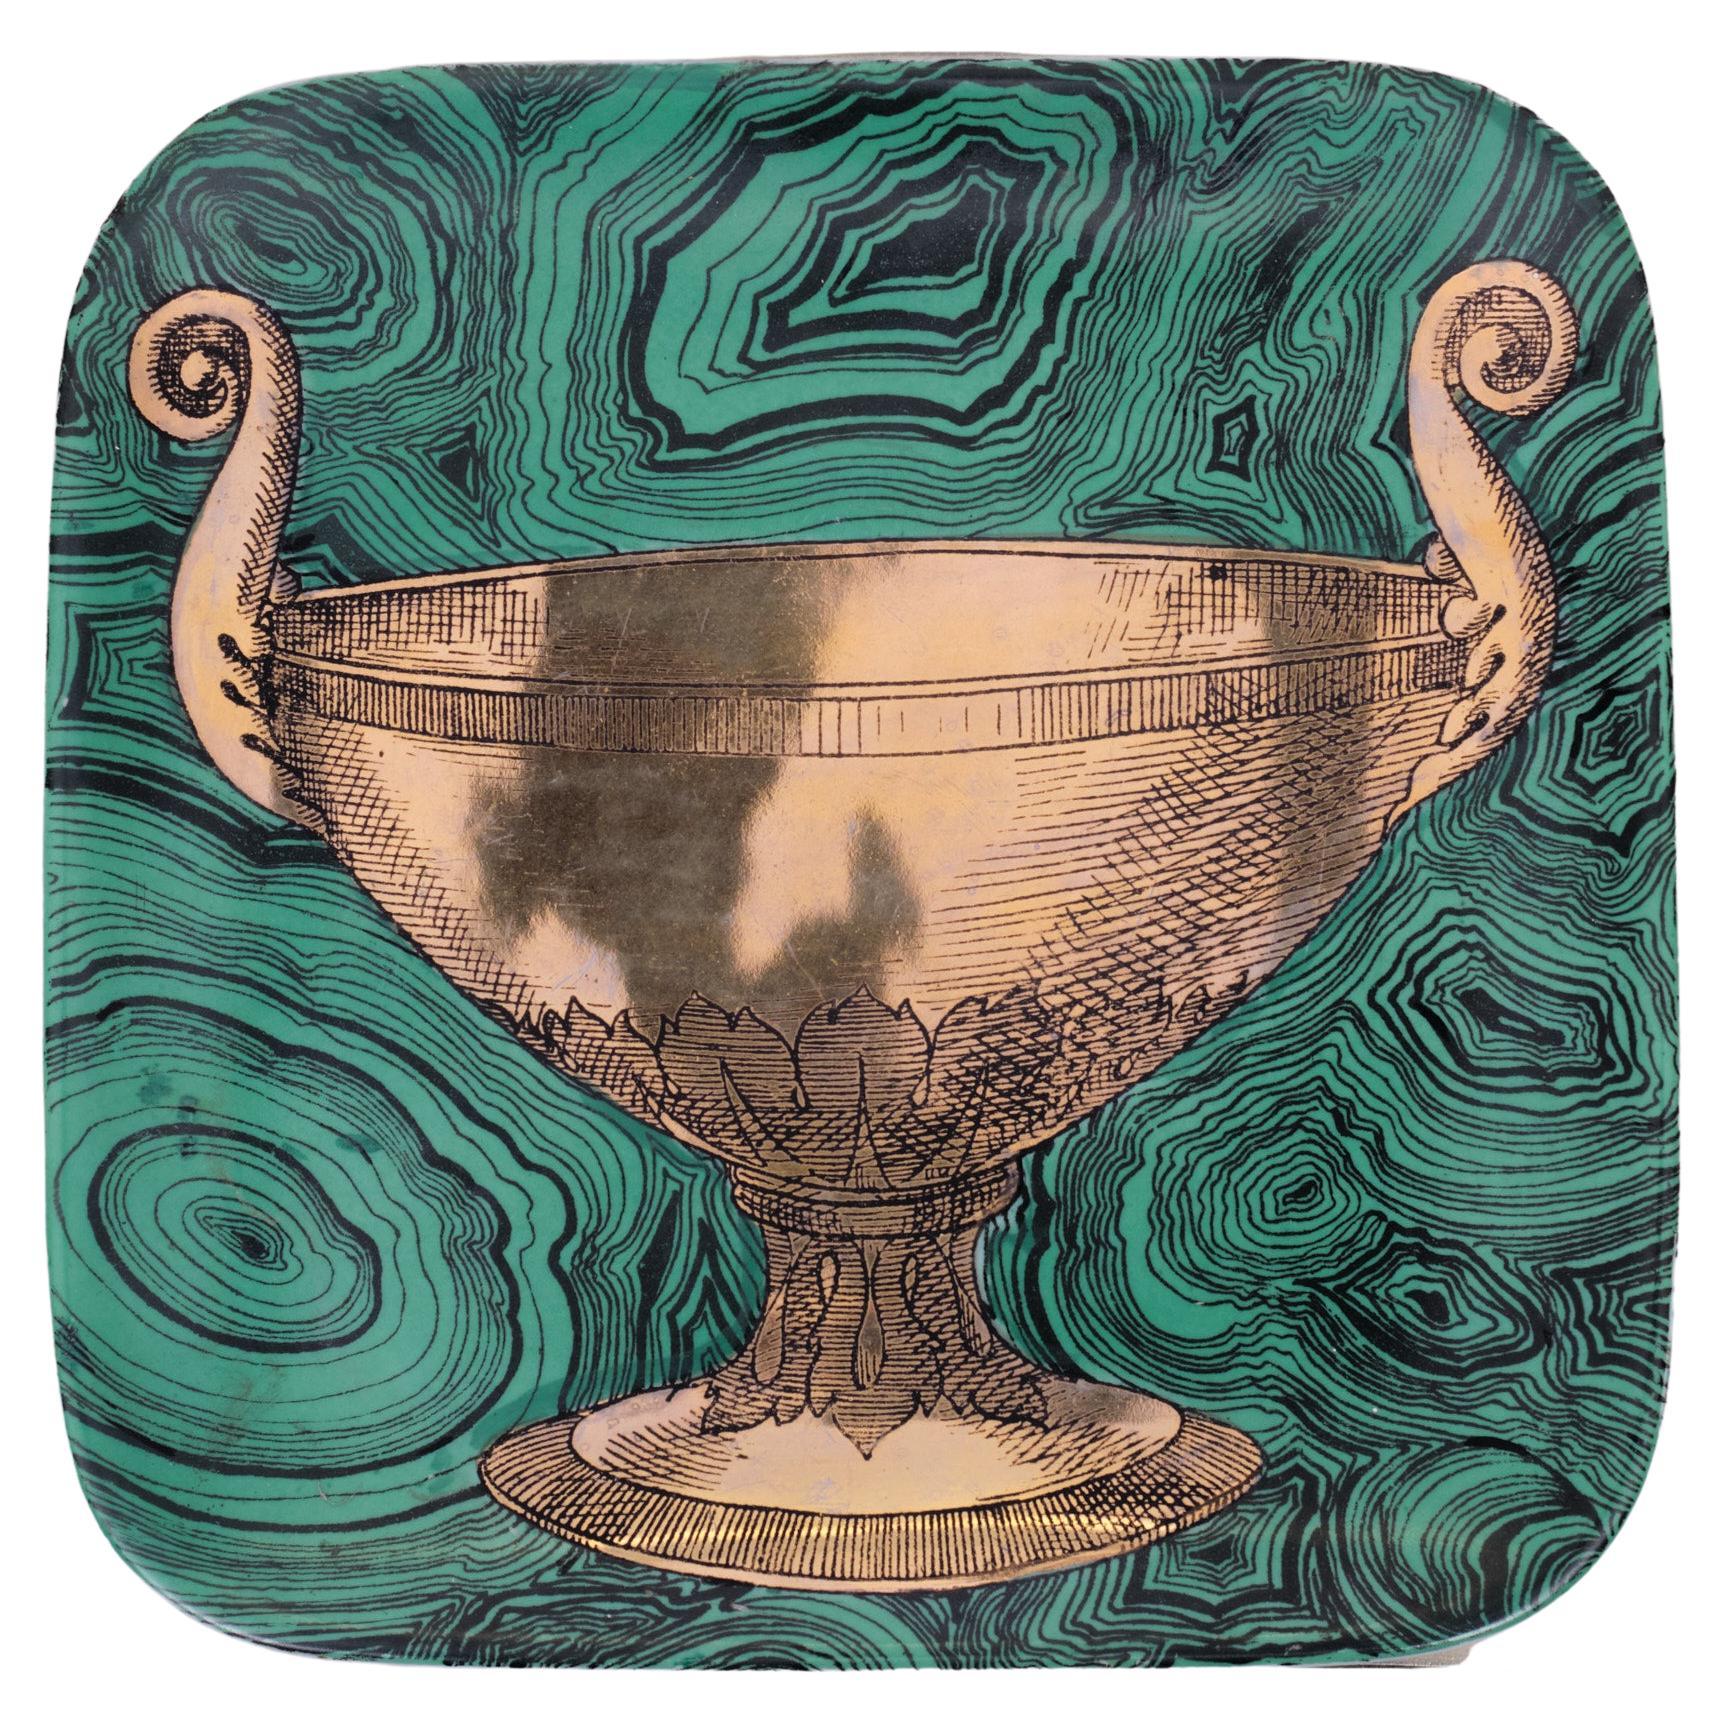 A ceramic decorative plate with an green faux malachite ground and painted in gold by Piero Fornasetti, Italy, manufactured in midcentury in 1950s.
This hand-colored decorative plate is one in a series of ‘faux malachite’ designs that Piero